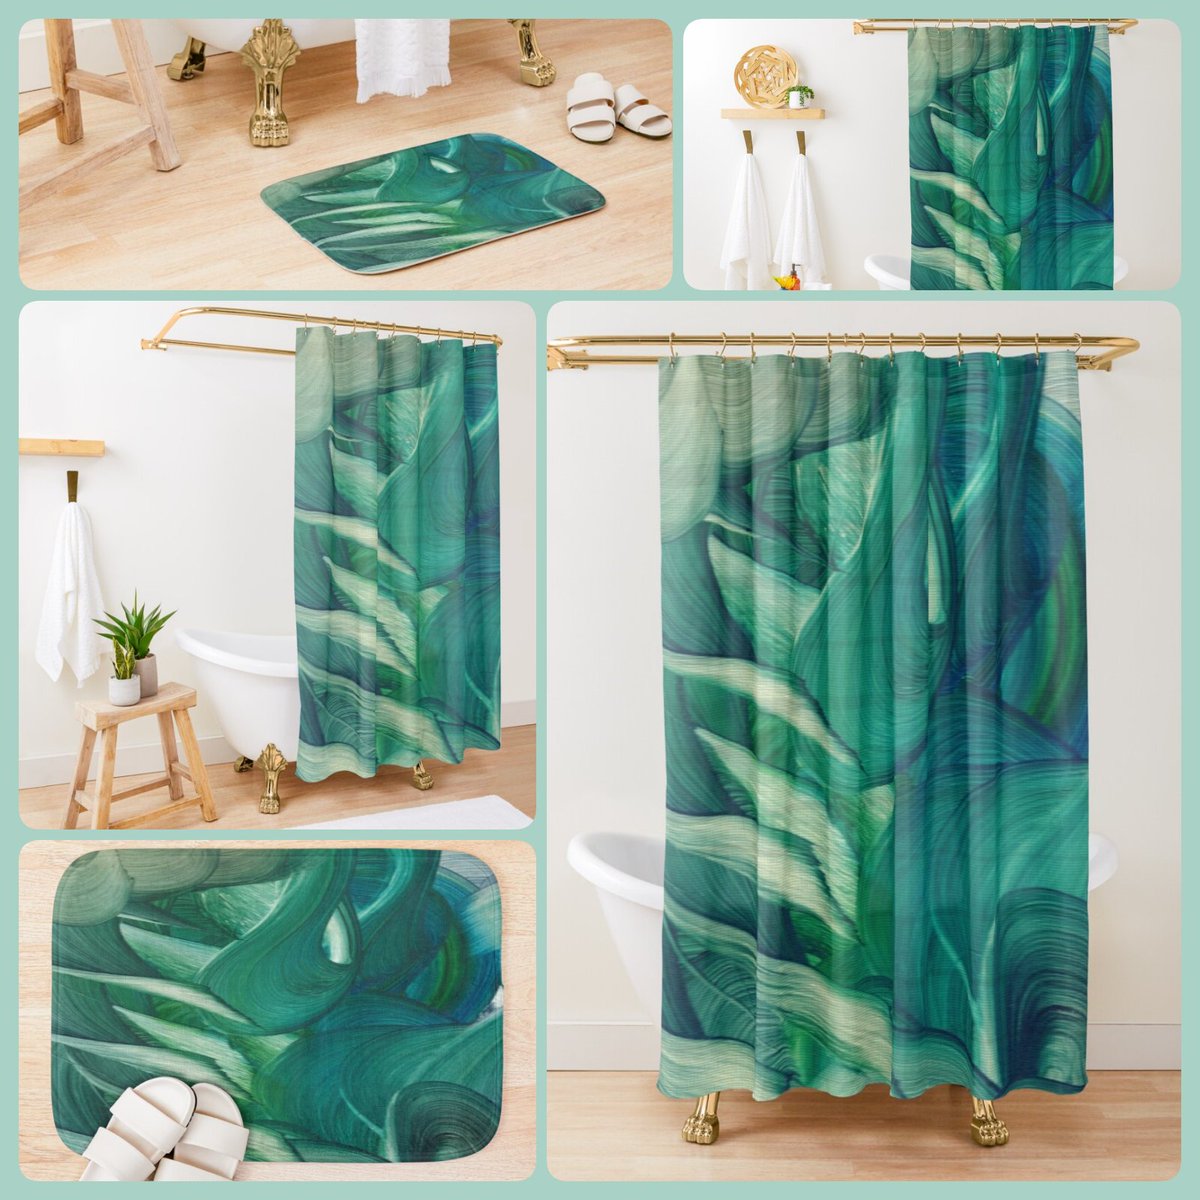 Audhumla Shower Curtain~by Art Falaxy
~Be Artful~ #accents #homedecor #art #artfalaxy #acrylicblocks #bathmats #blankets #comforters #duvets #pillows #redbubble #shower #trendy #modern #gifts #FindYourThing #turquoise #teal #blue #green

redbubble.com/i/shower-curta…